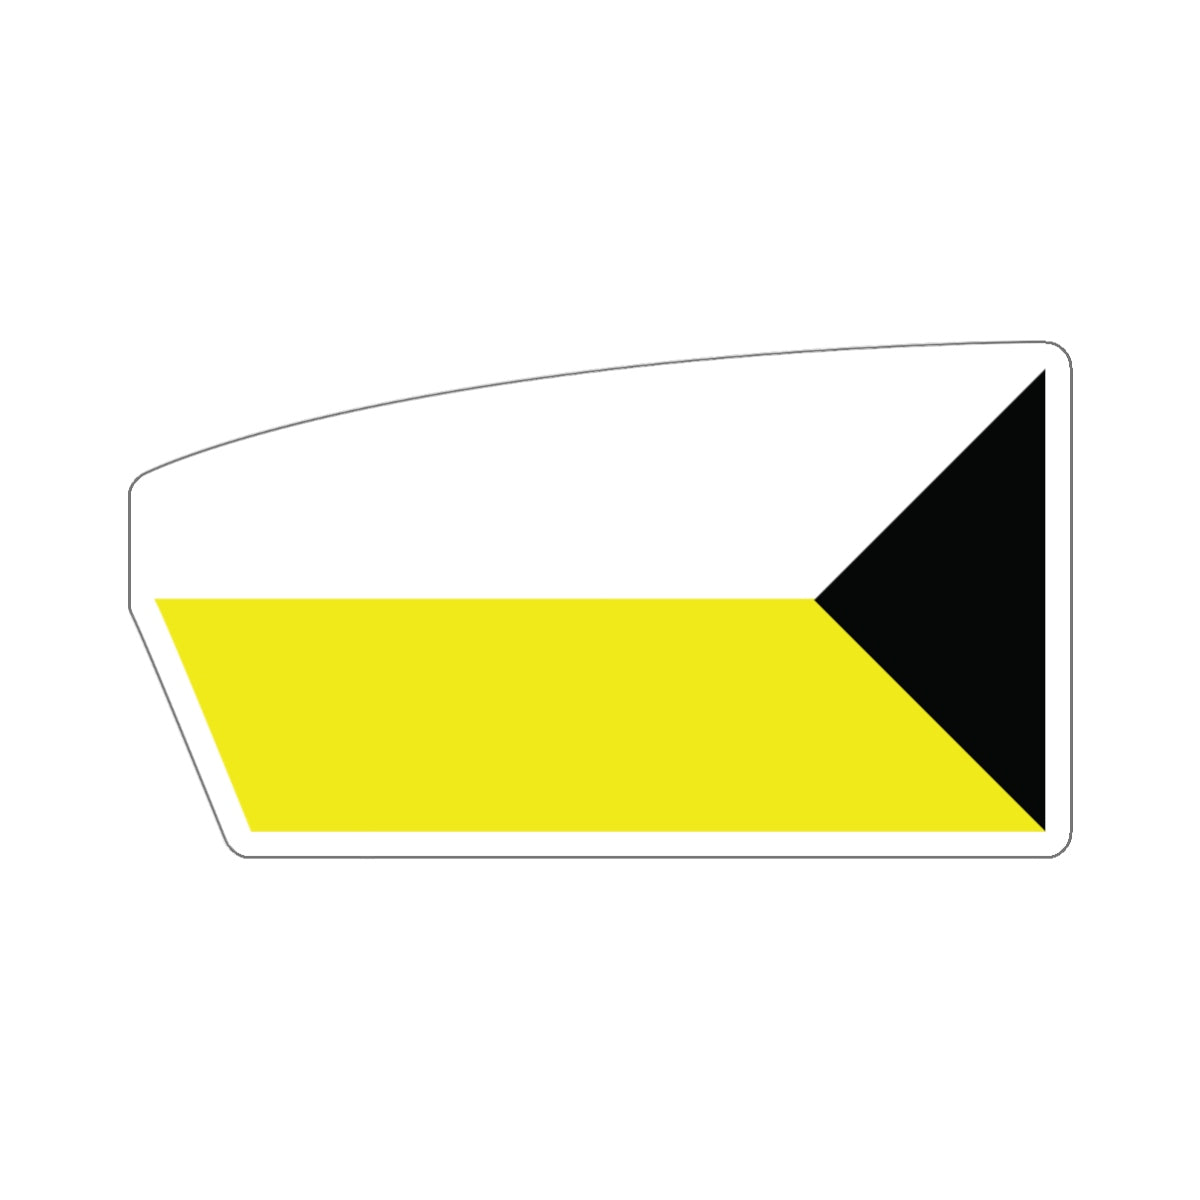 Sweeps _ Sculls Rowing Sticker